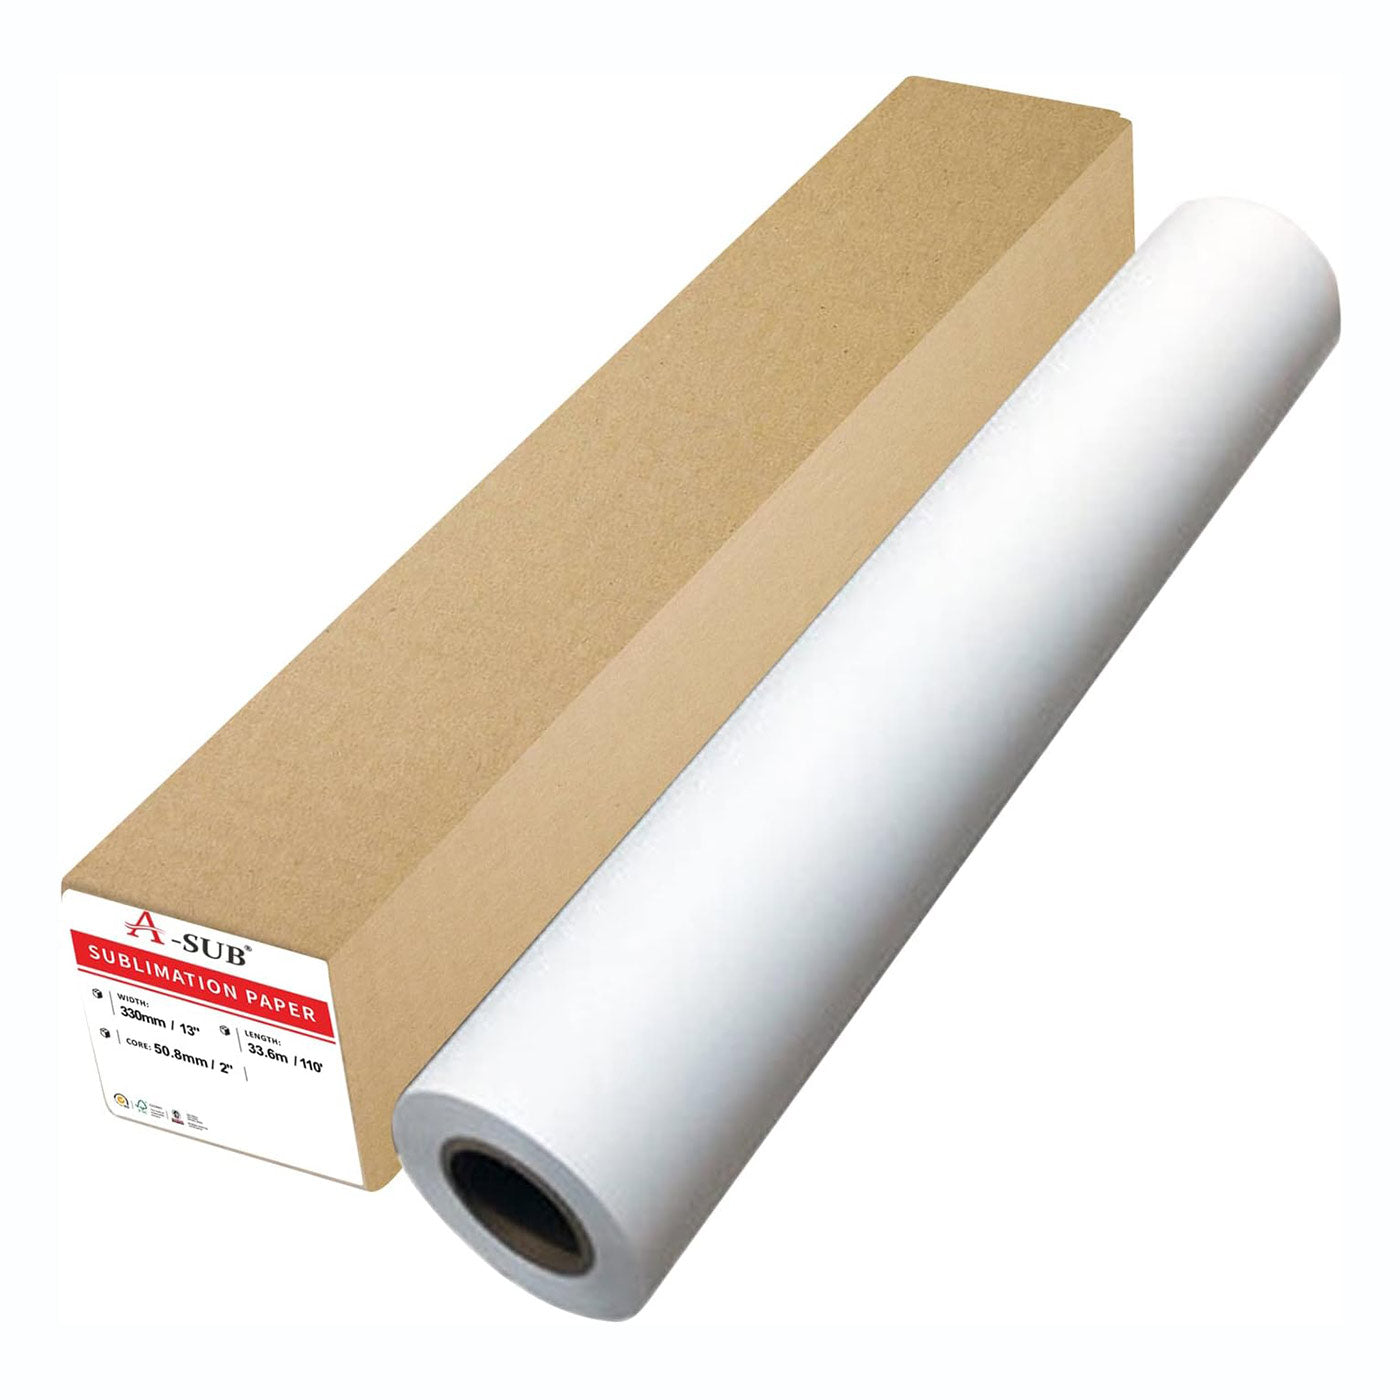 A-SUB 105gsm Sublimation roll 13"x110'/13"x300'